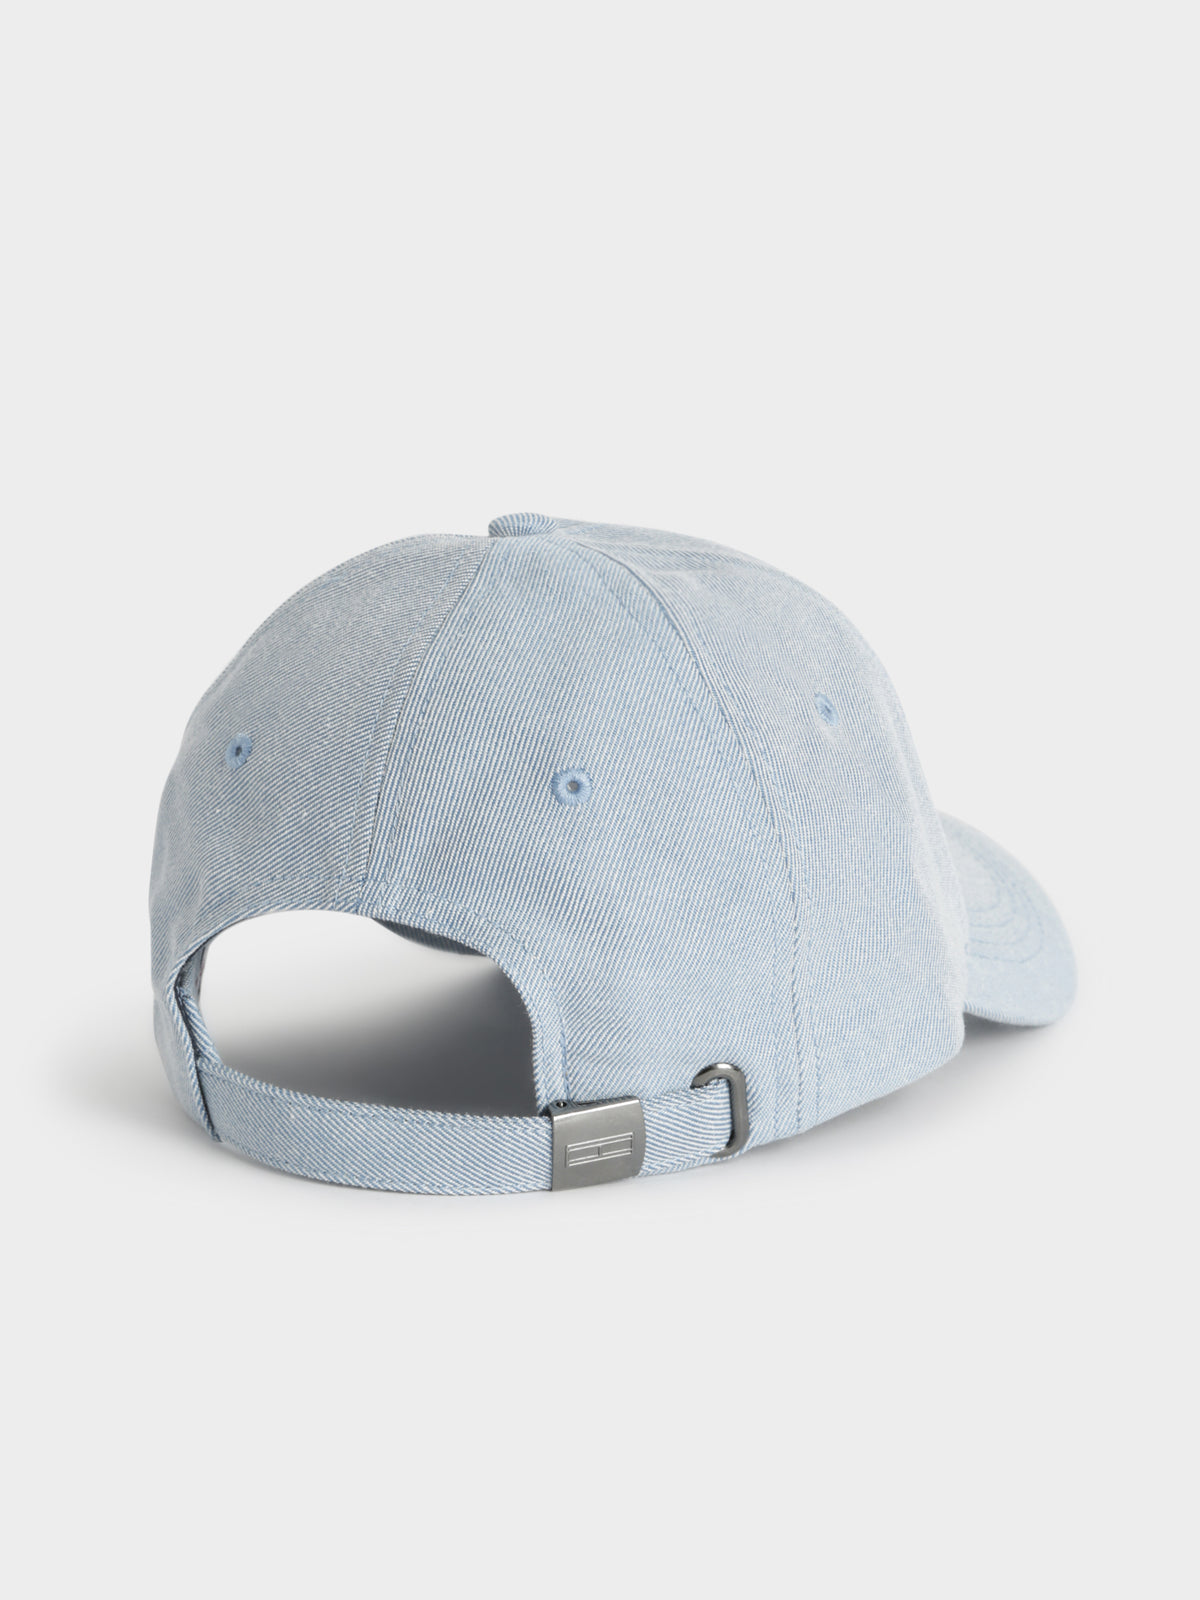 Flag Washed Denim Cap in Liberty